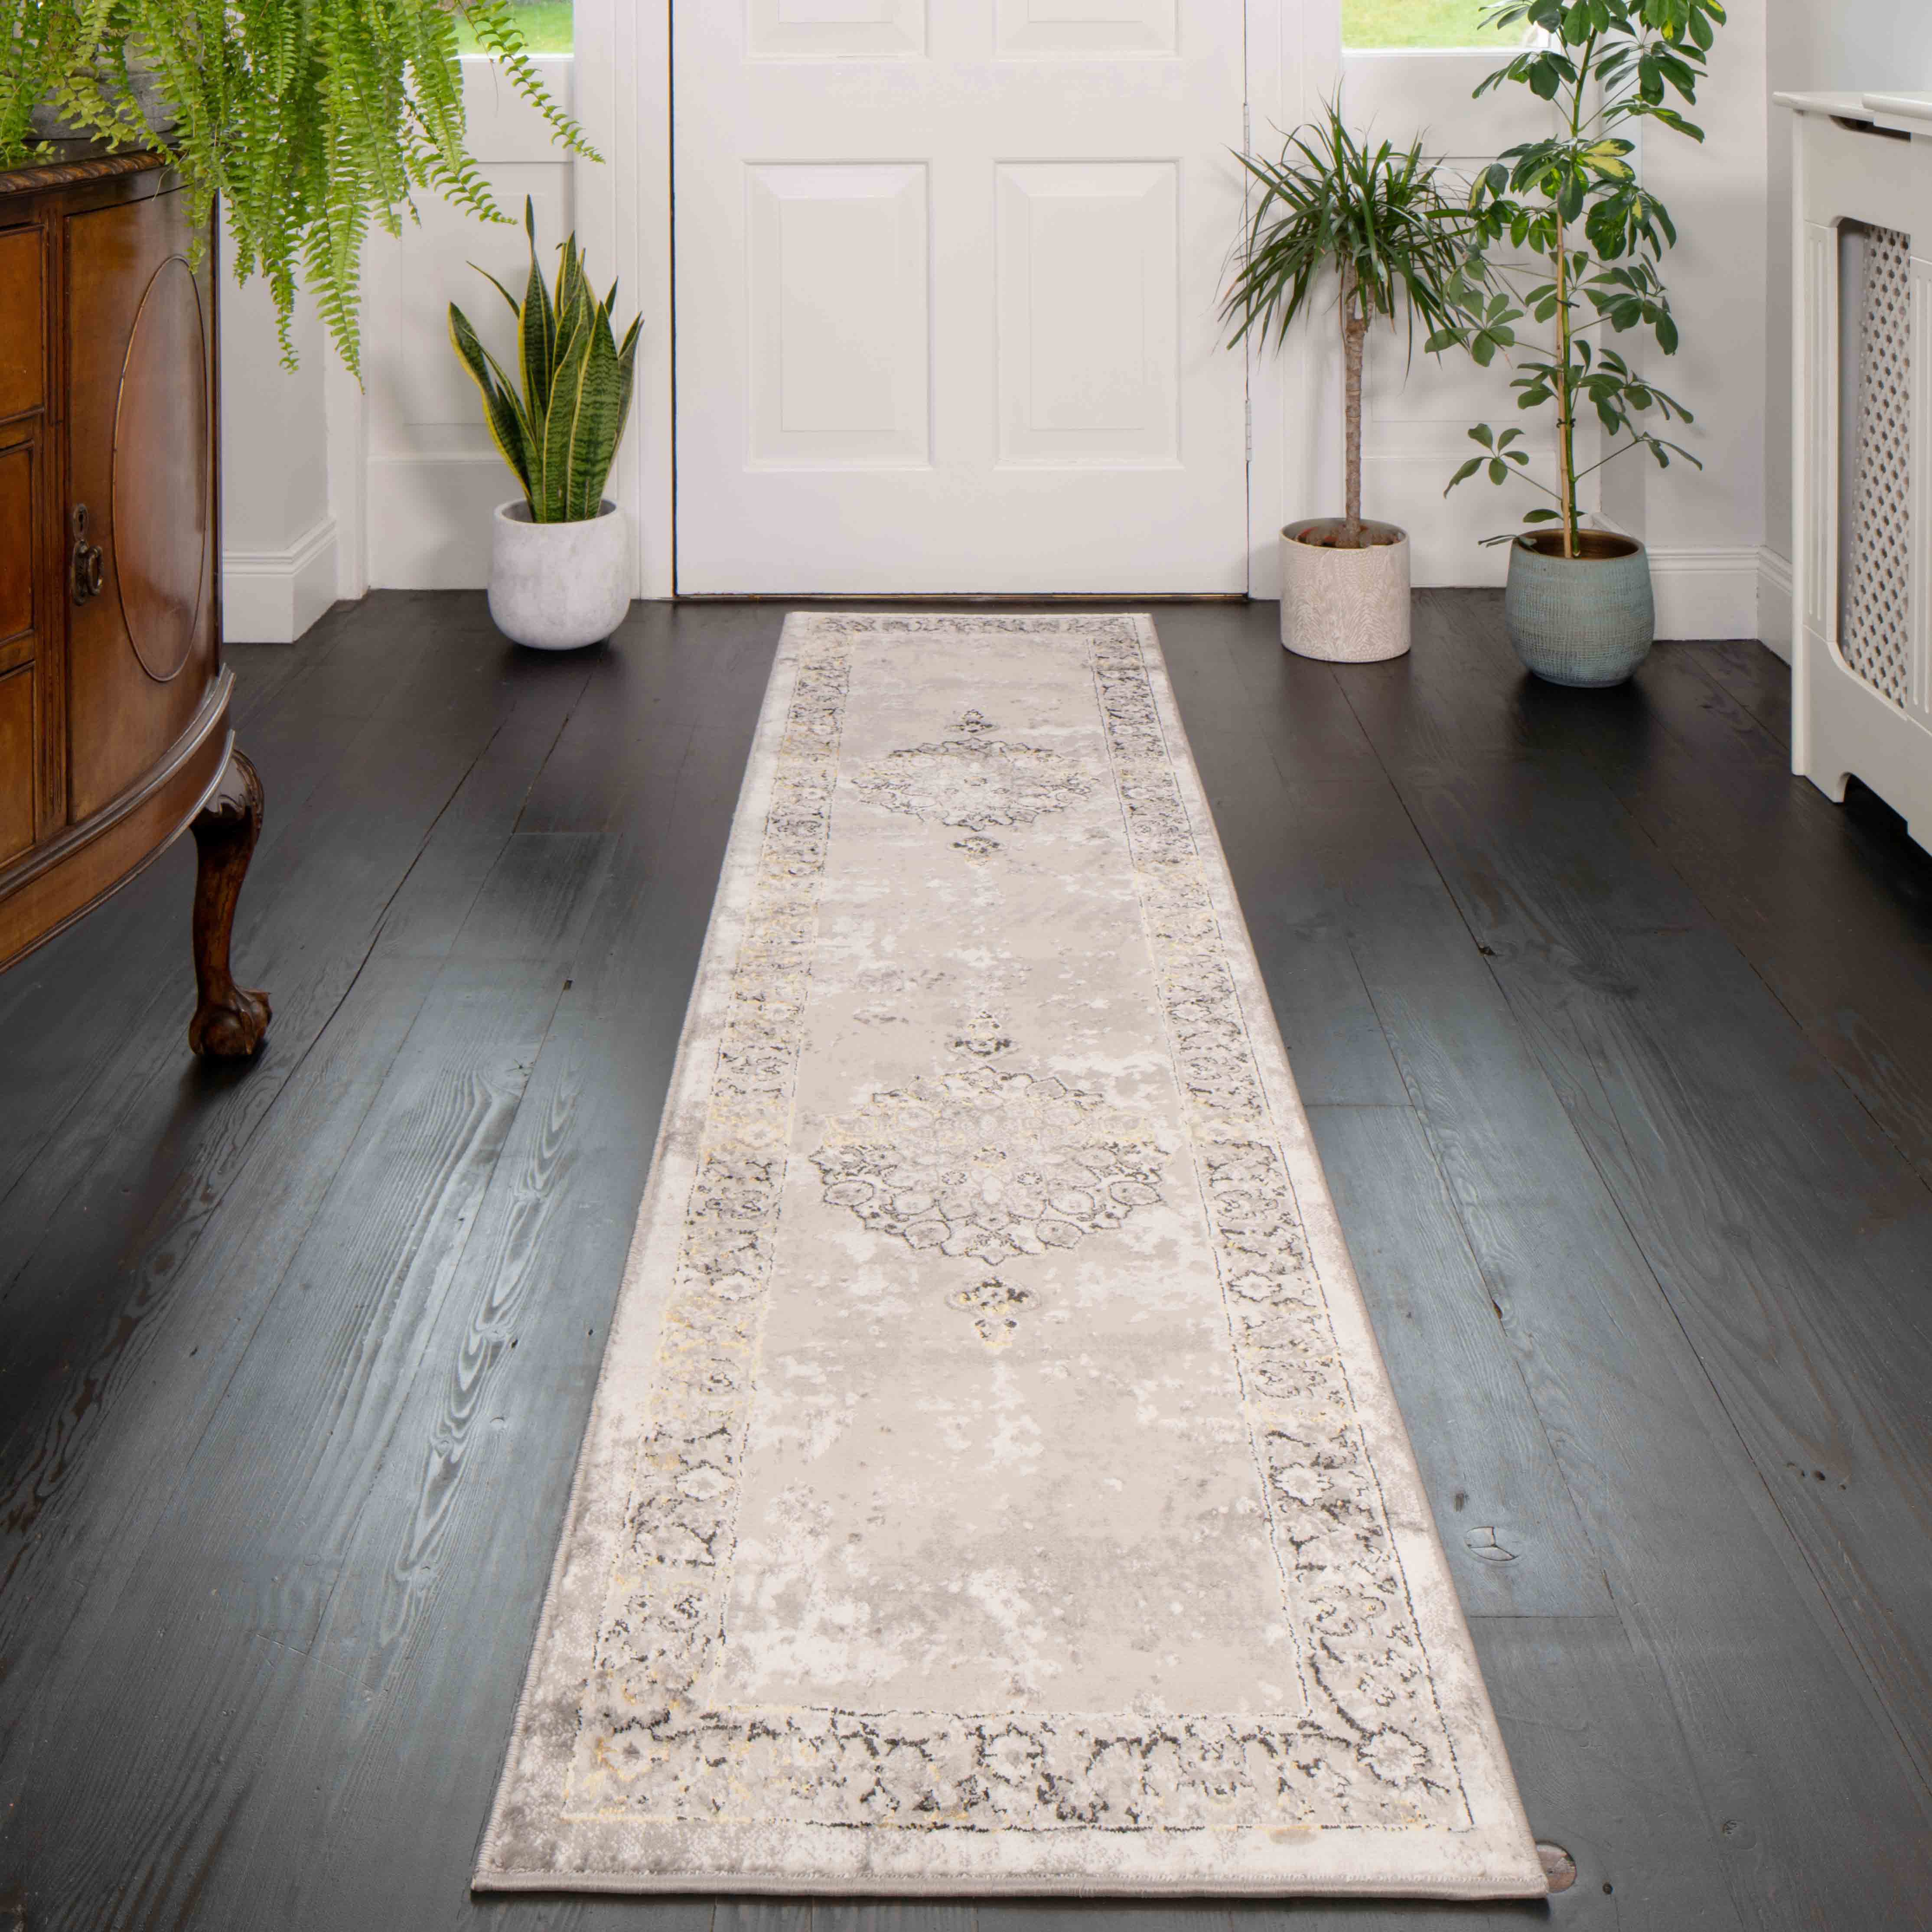 Gold Traditional Distressed Hall Runner Rugs - Hatton - 60cm x 110cm